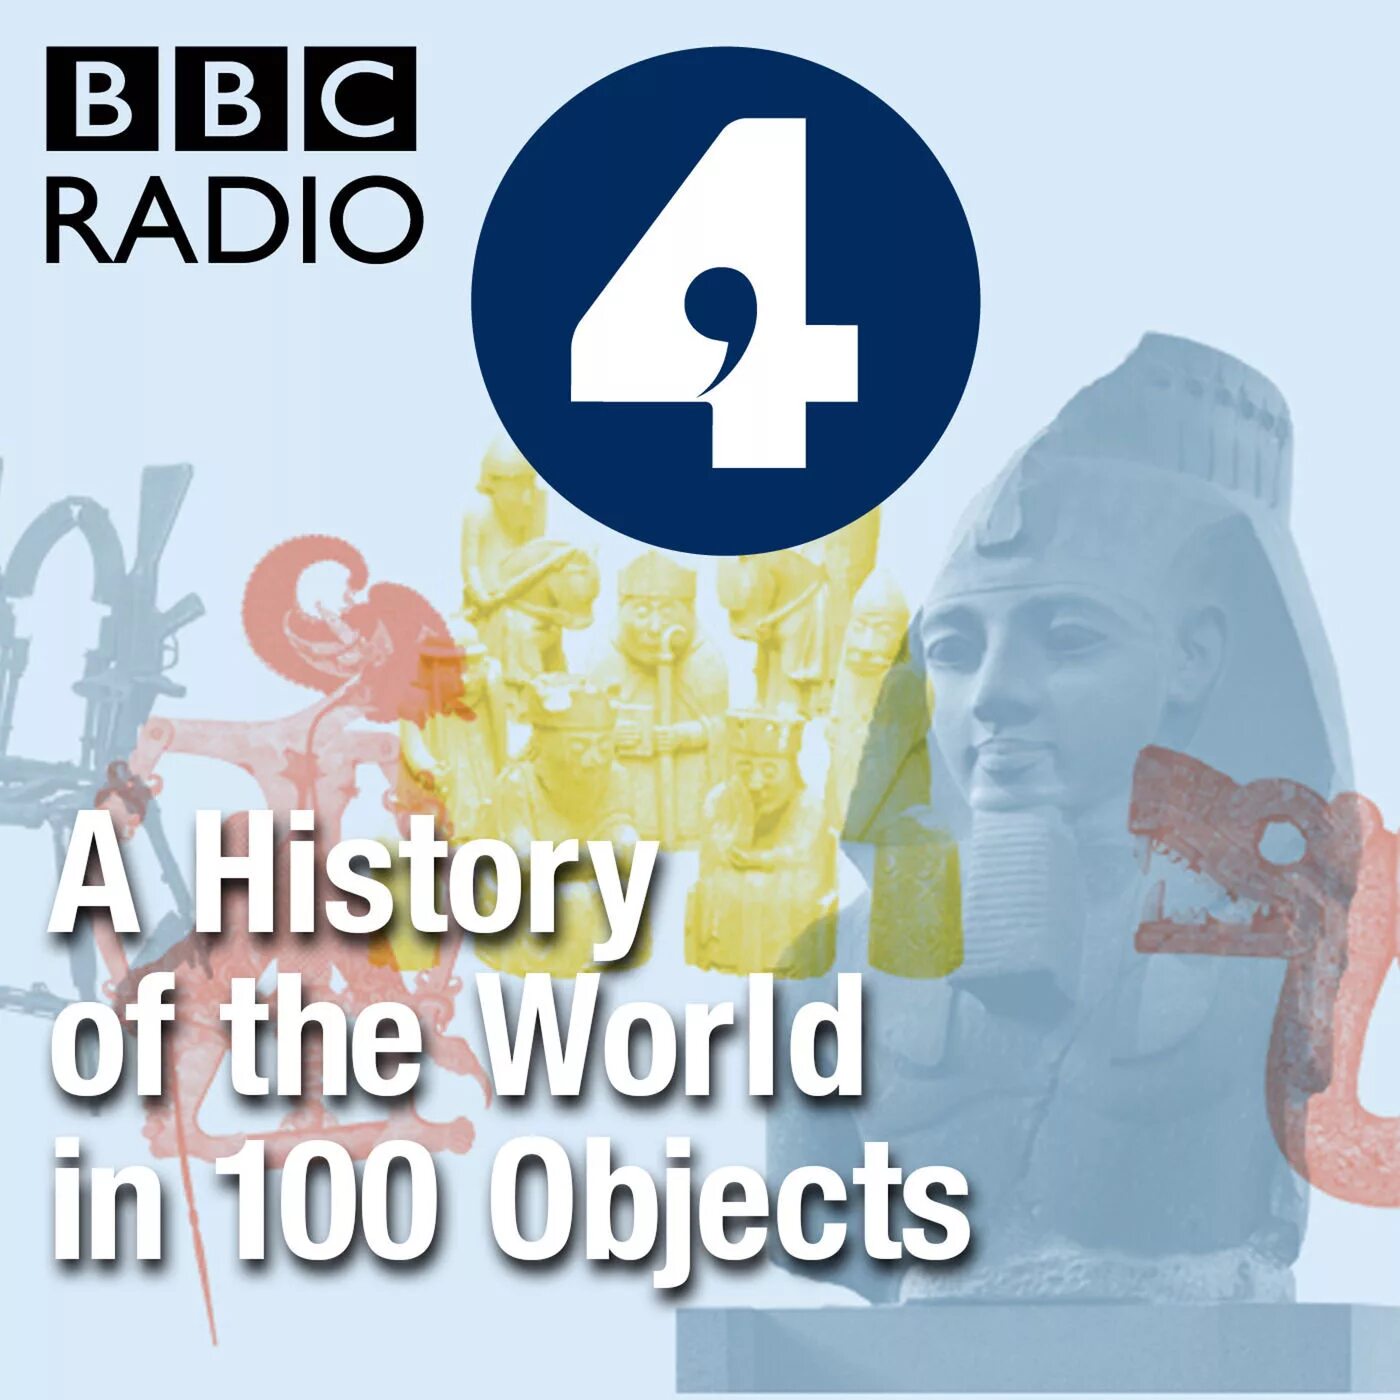 100 objects. Подкаст ббс. In-c story. The World of objects. A History of the World in 100 objects by Neil MACGREGOR.